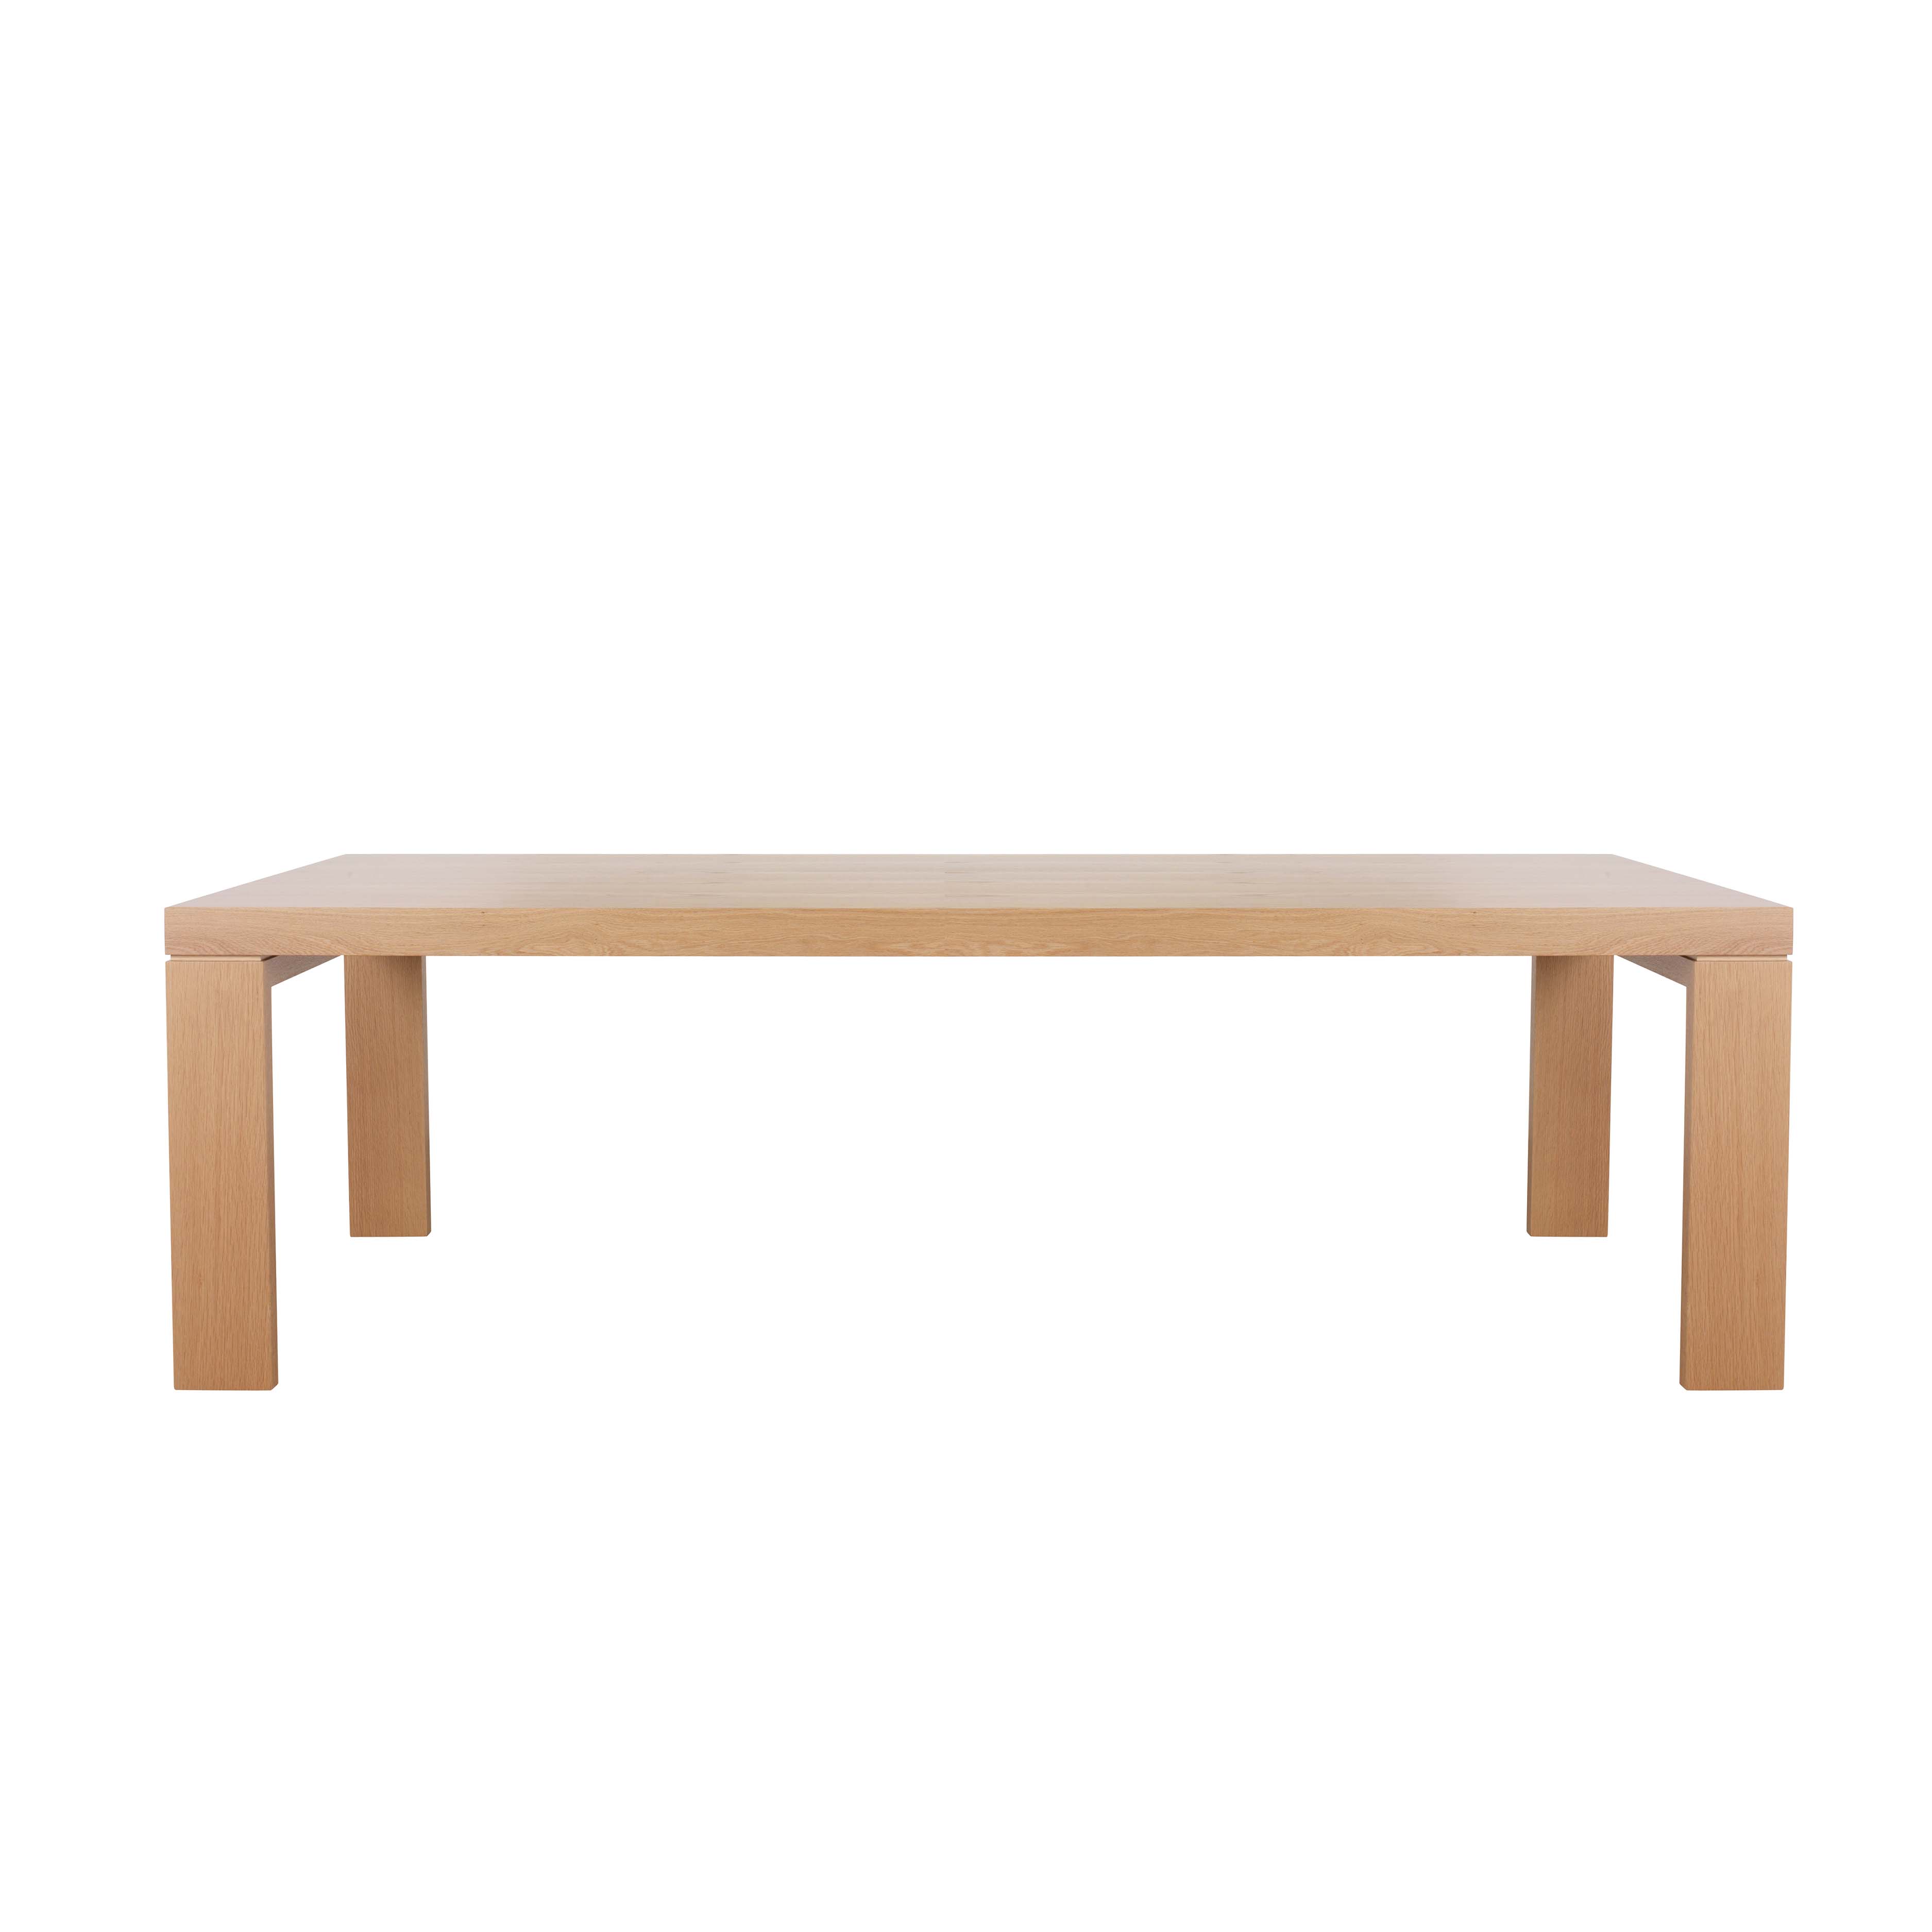 April Dining Table - Zuster Furniture